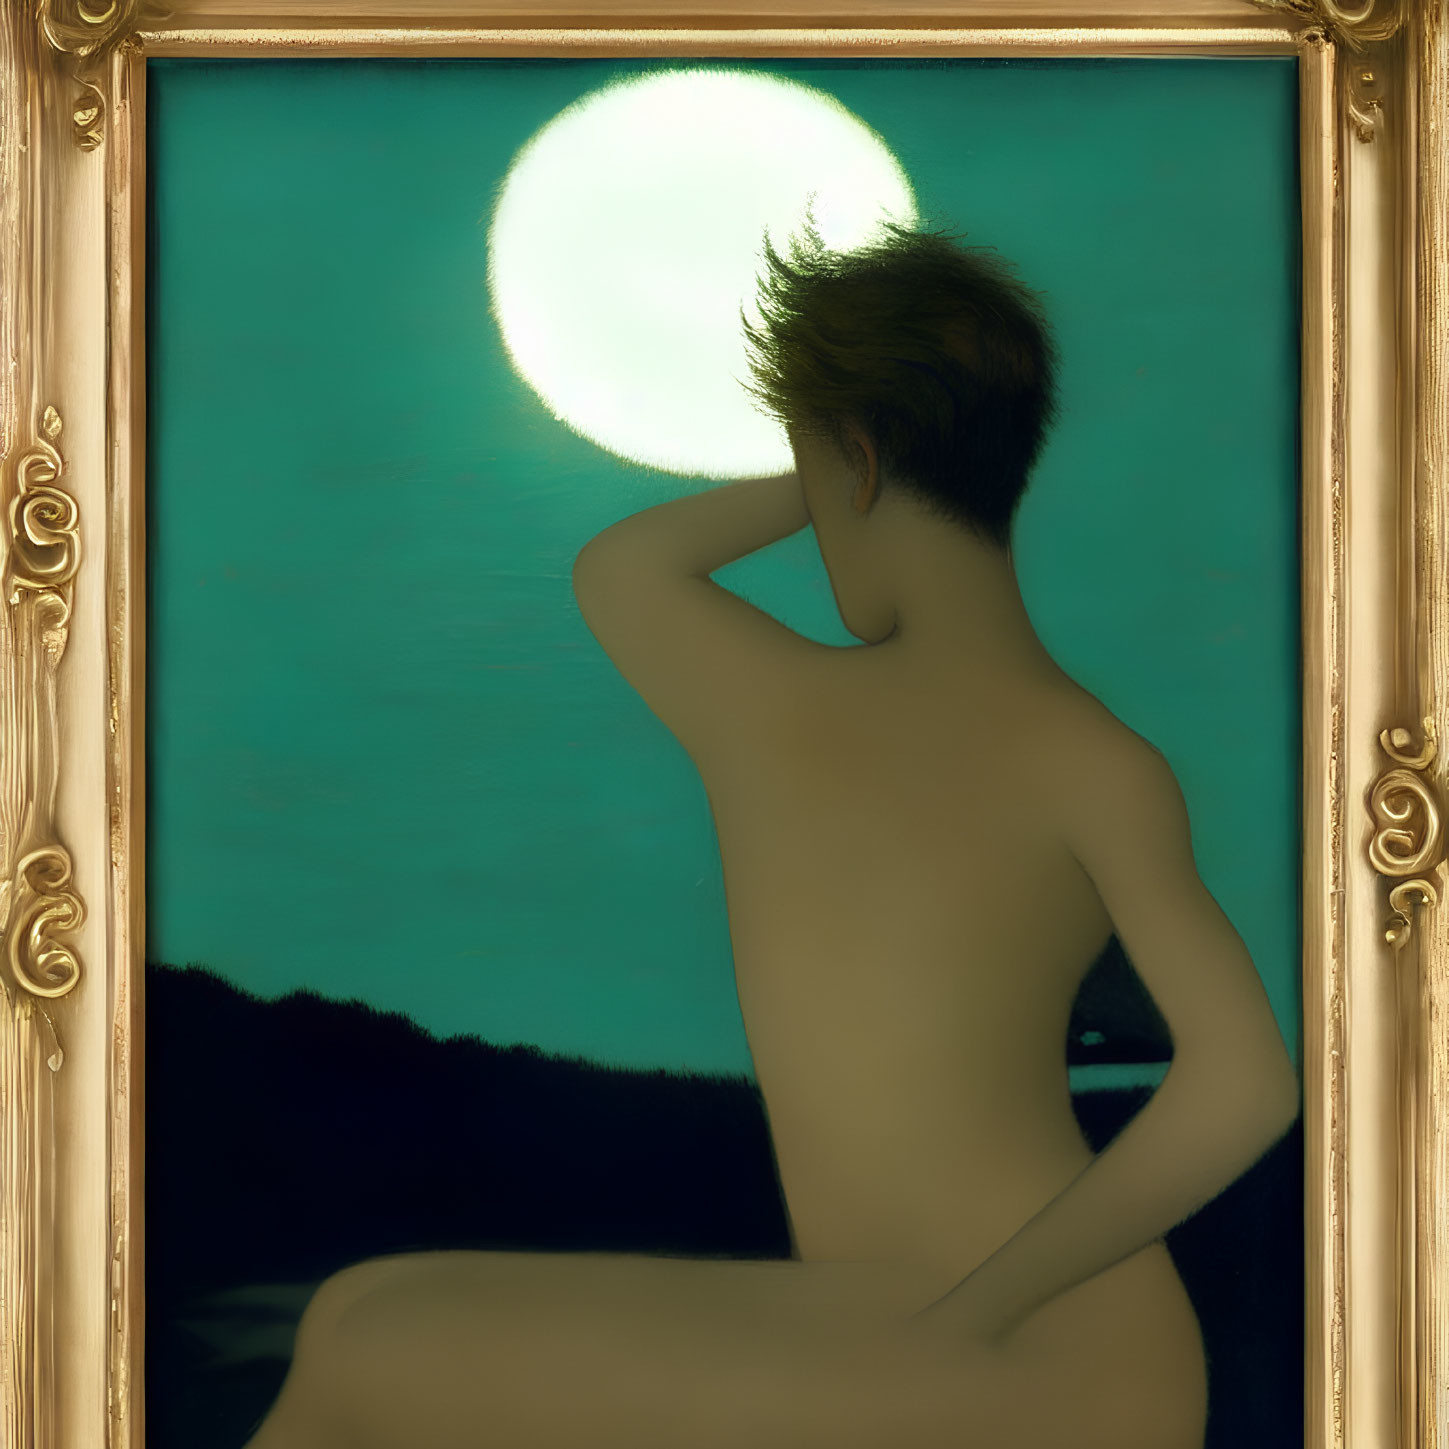 Person admiring full moon in turquoise sky with golden borders